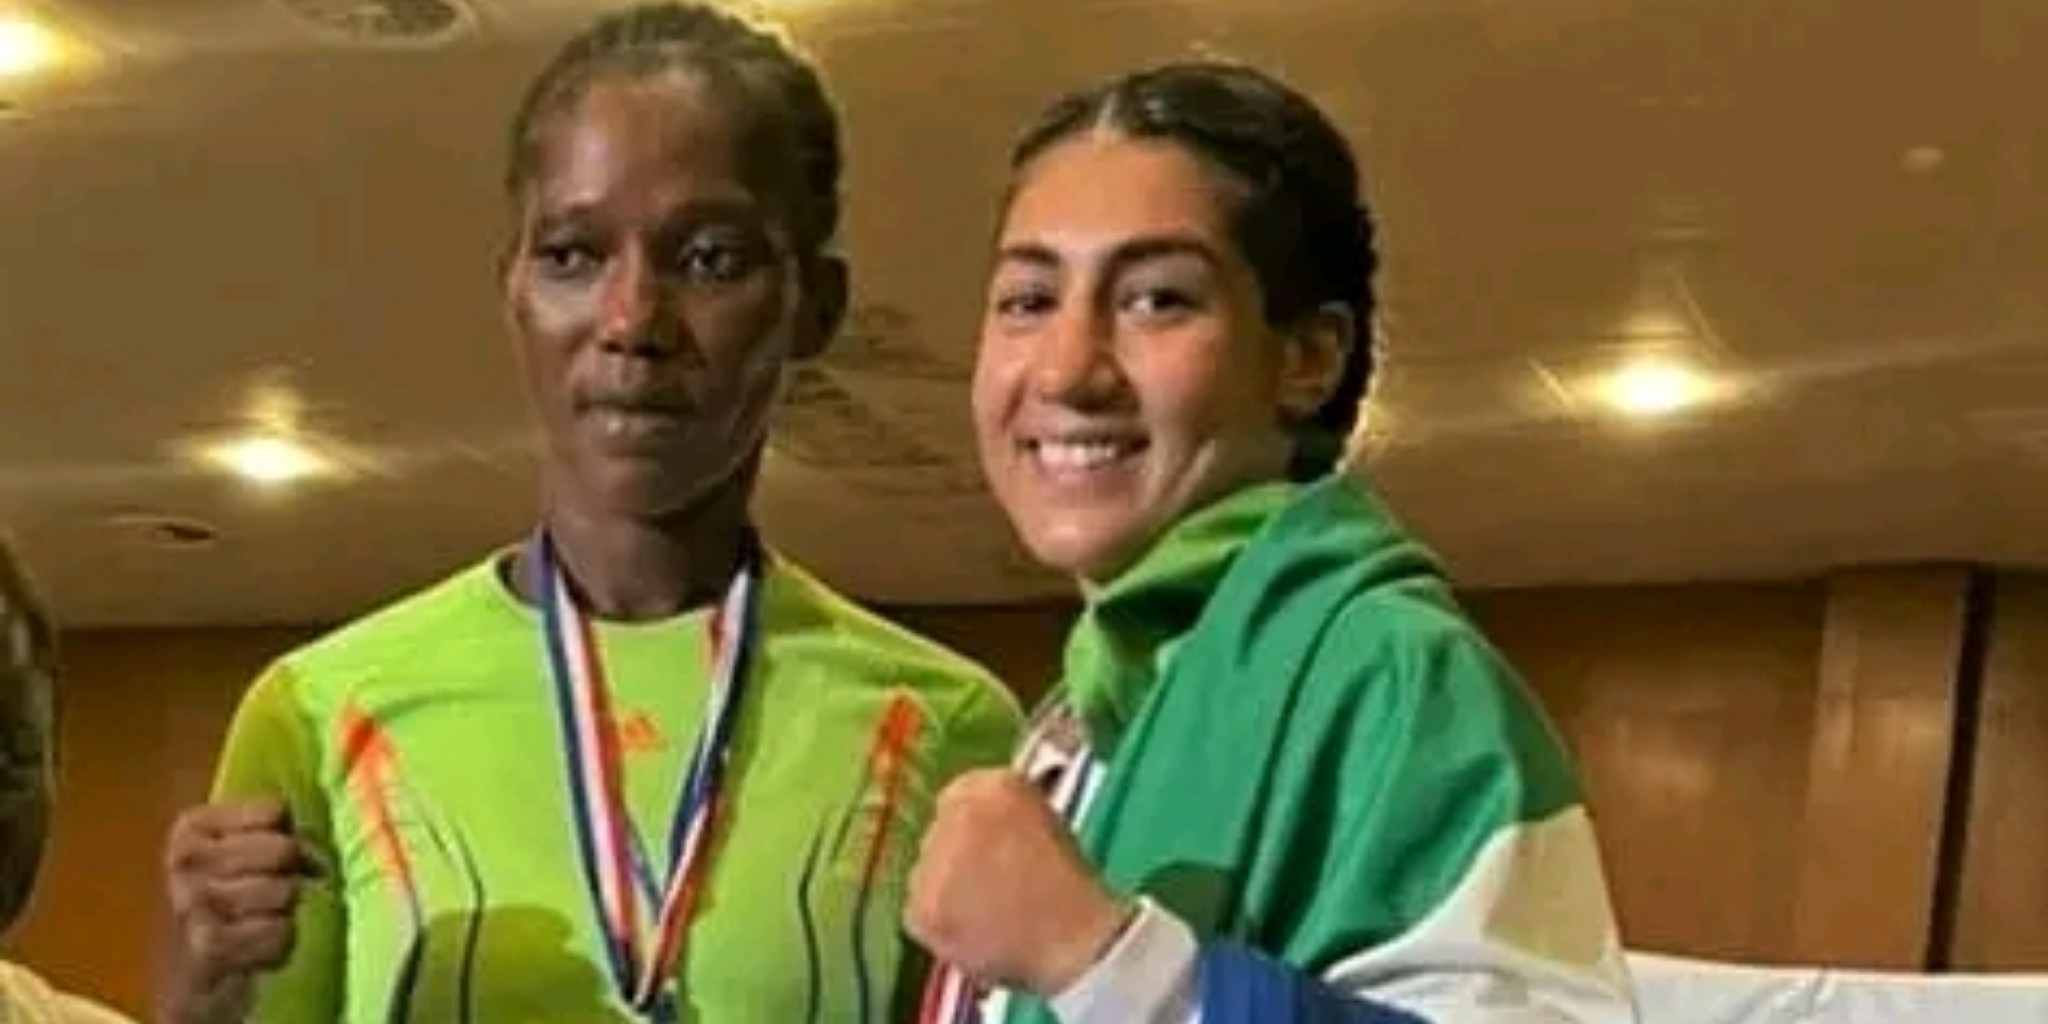 Sierra Leonean Female Boxers Zainab Keita And Sara Joo Qualify For Quarterfinal Rounds in The Commonwealth Games